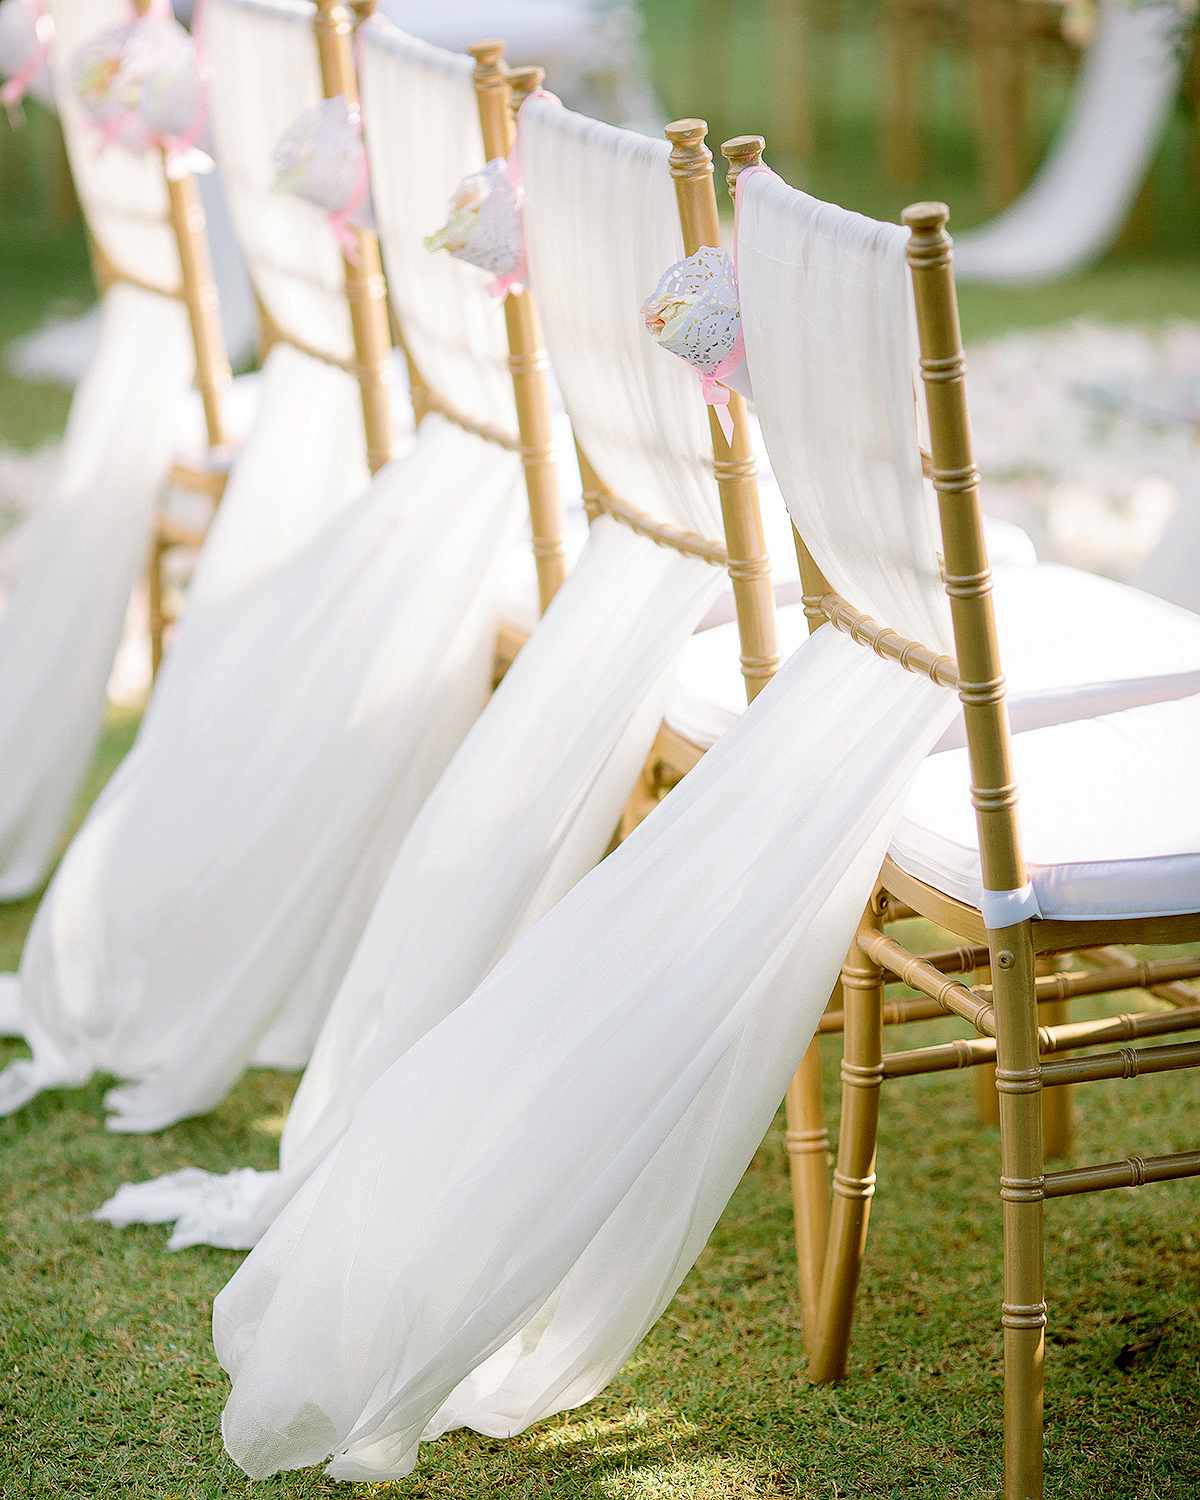 ladderback chairs woven with breezy tulle